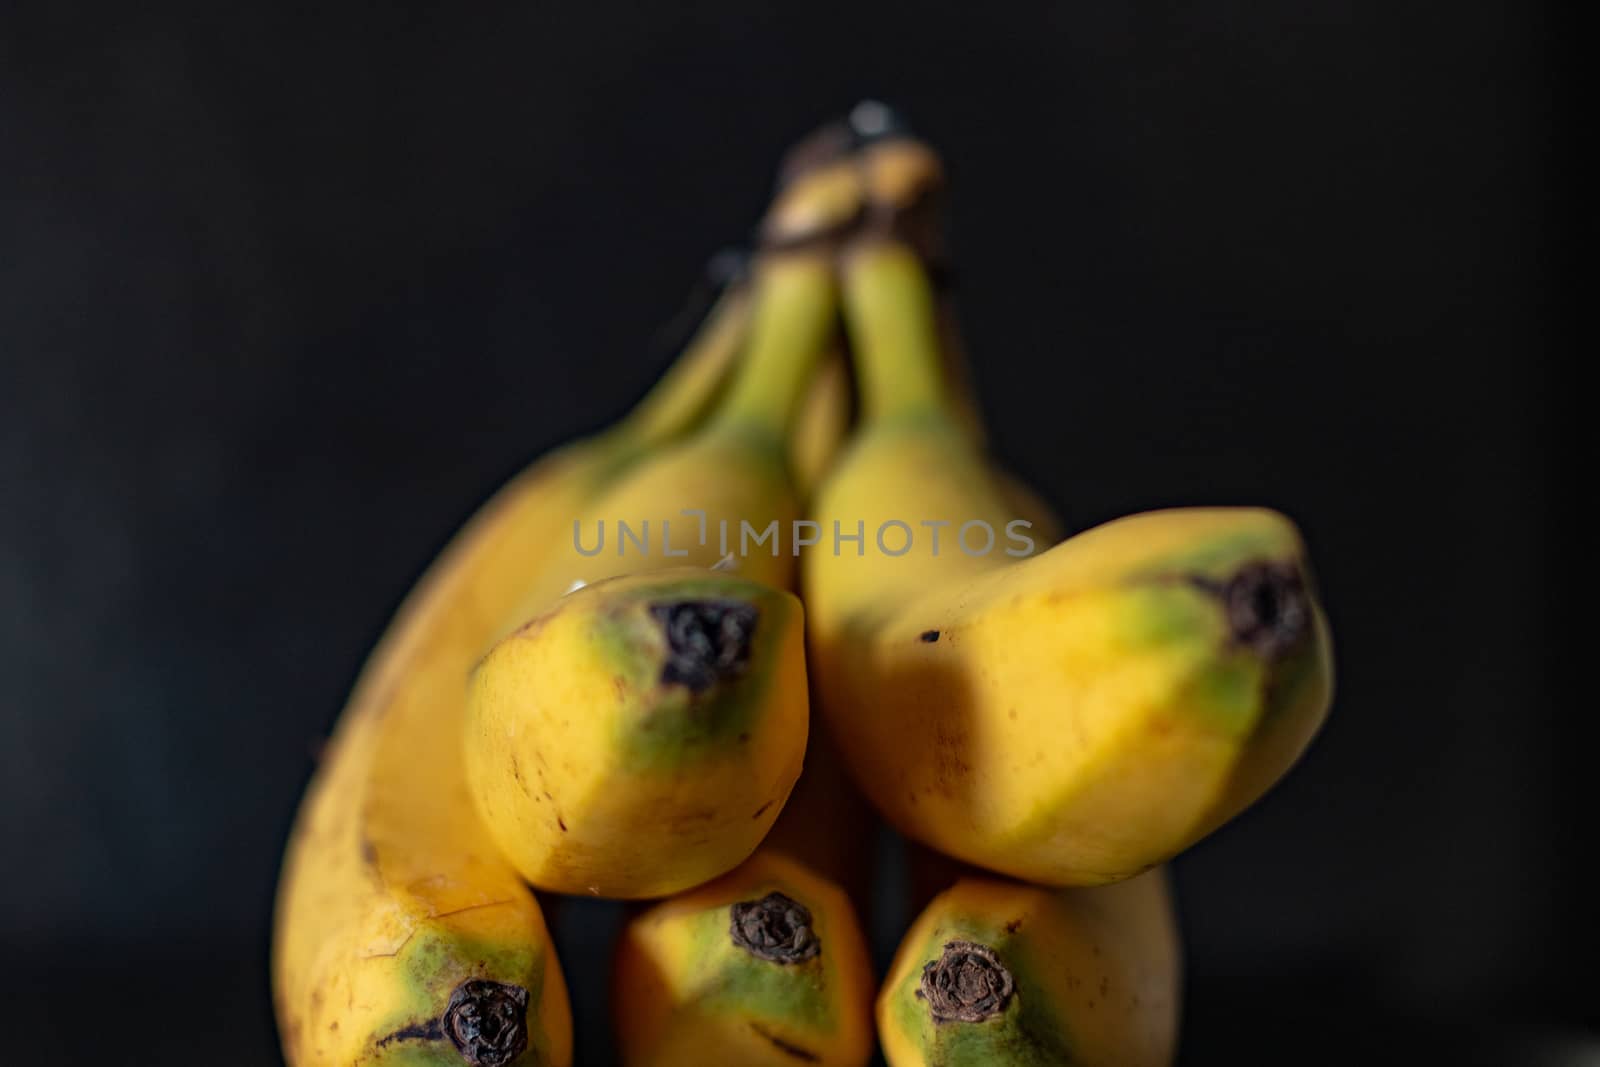 Ripe banana group on a black background. Fruit photography by mynewturtle1